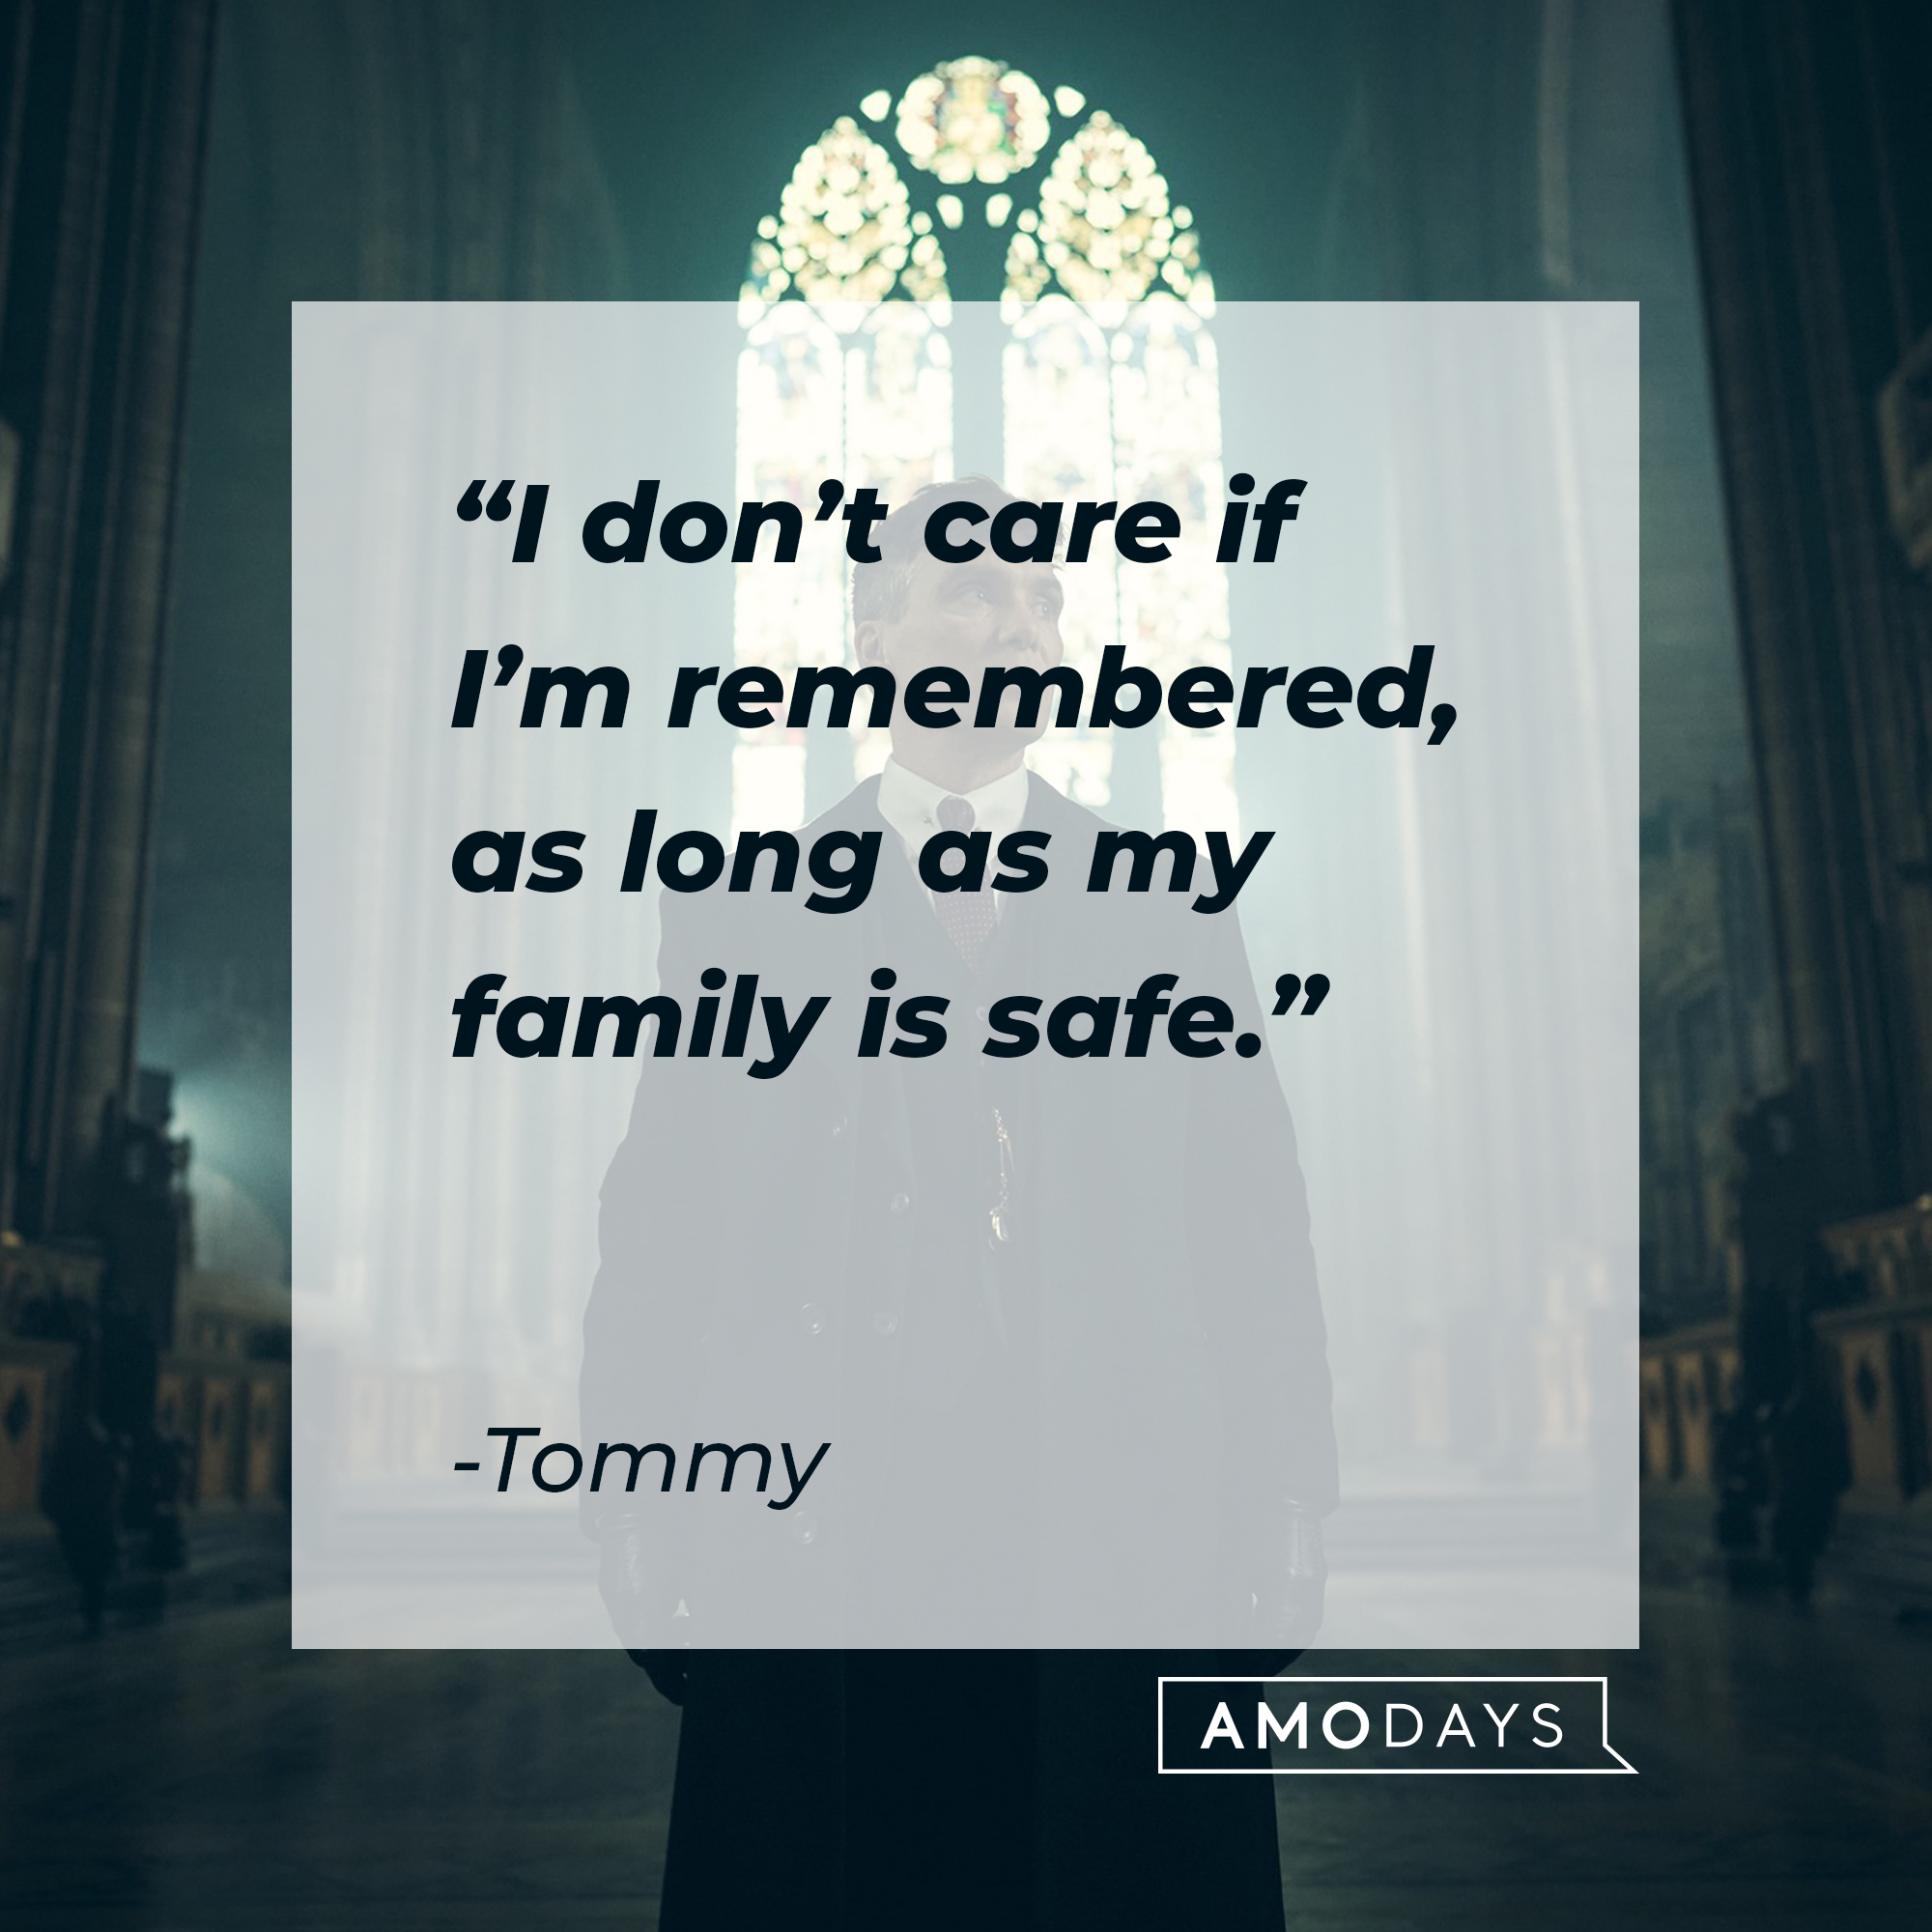 Tommy's quote: "I don't care if I'm remembered as long as my family is safe." | Source: facebook.com/PeakyBlinders